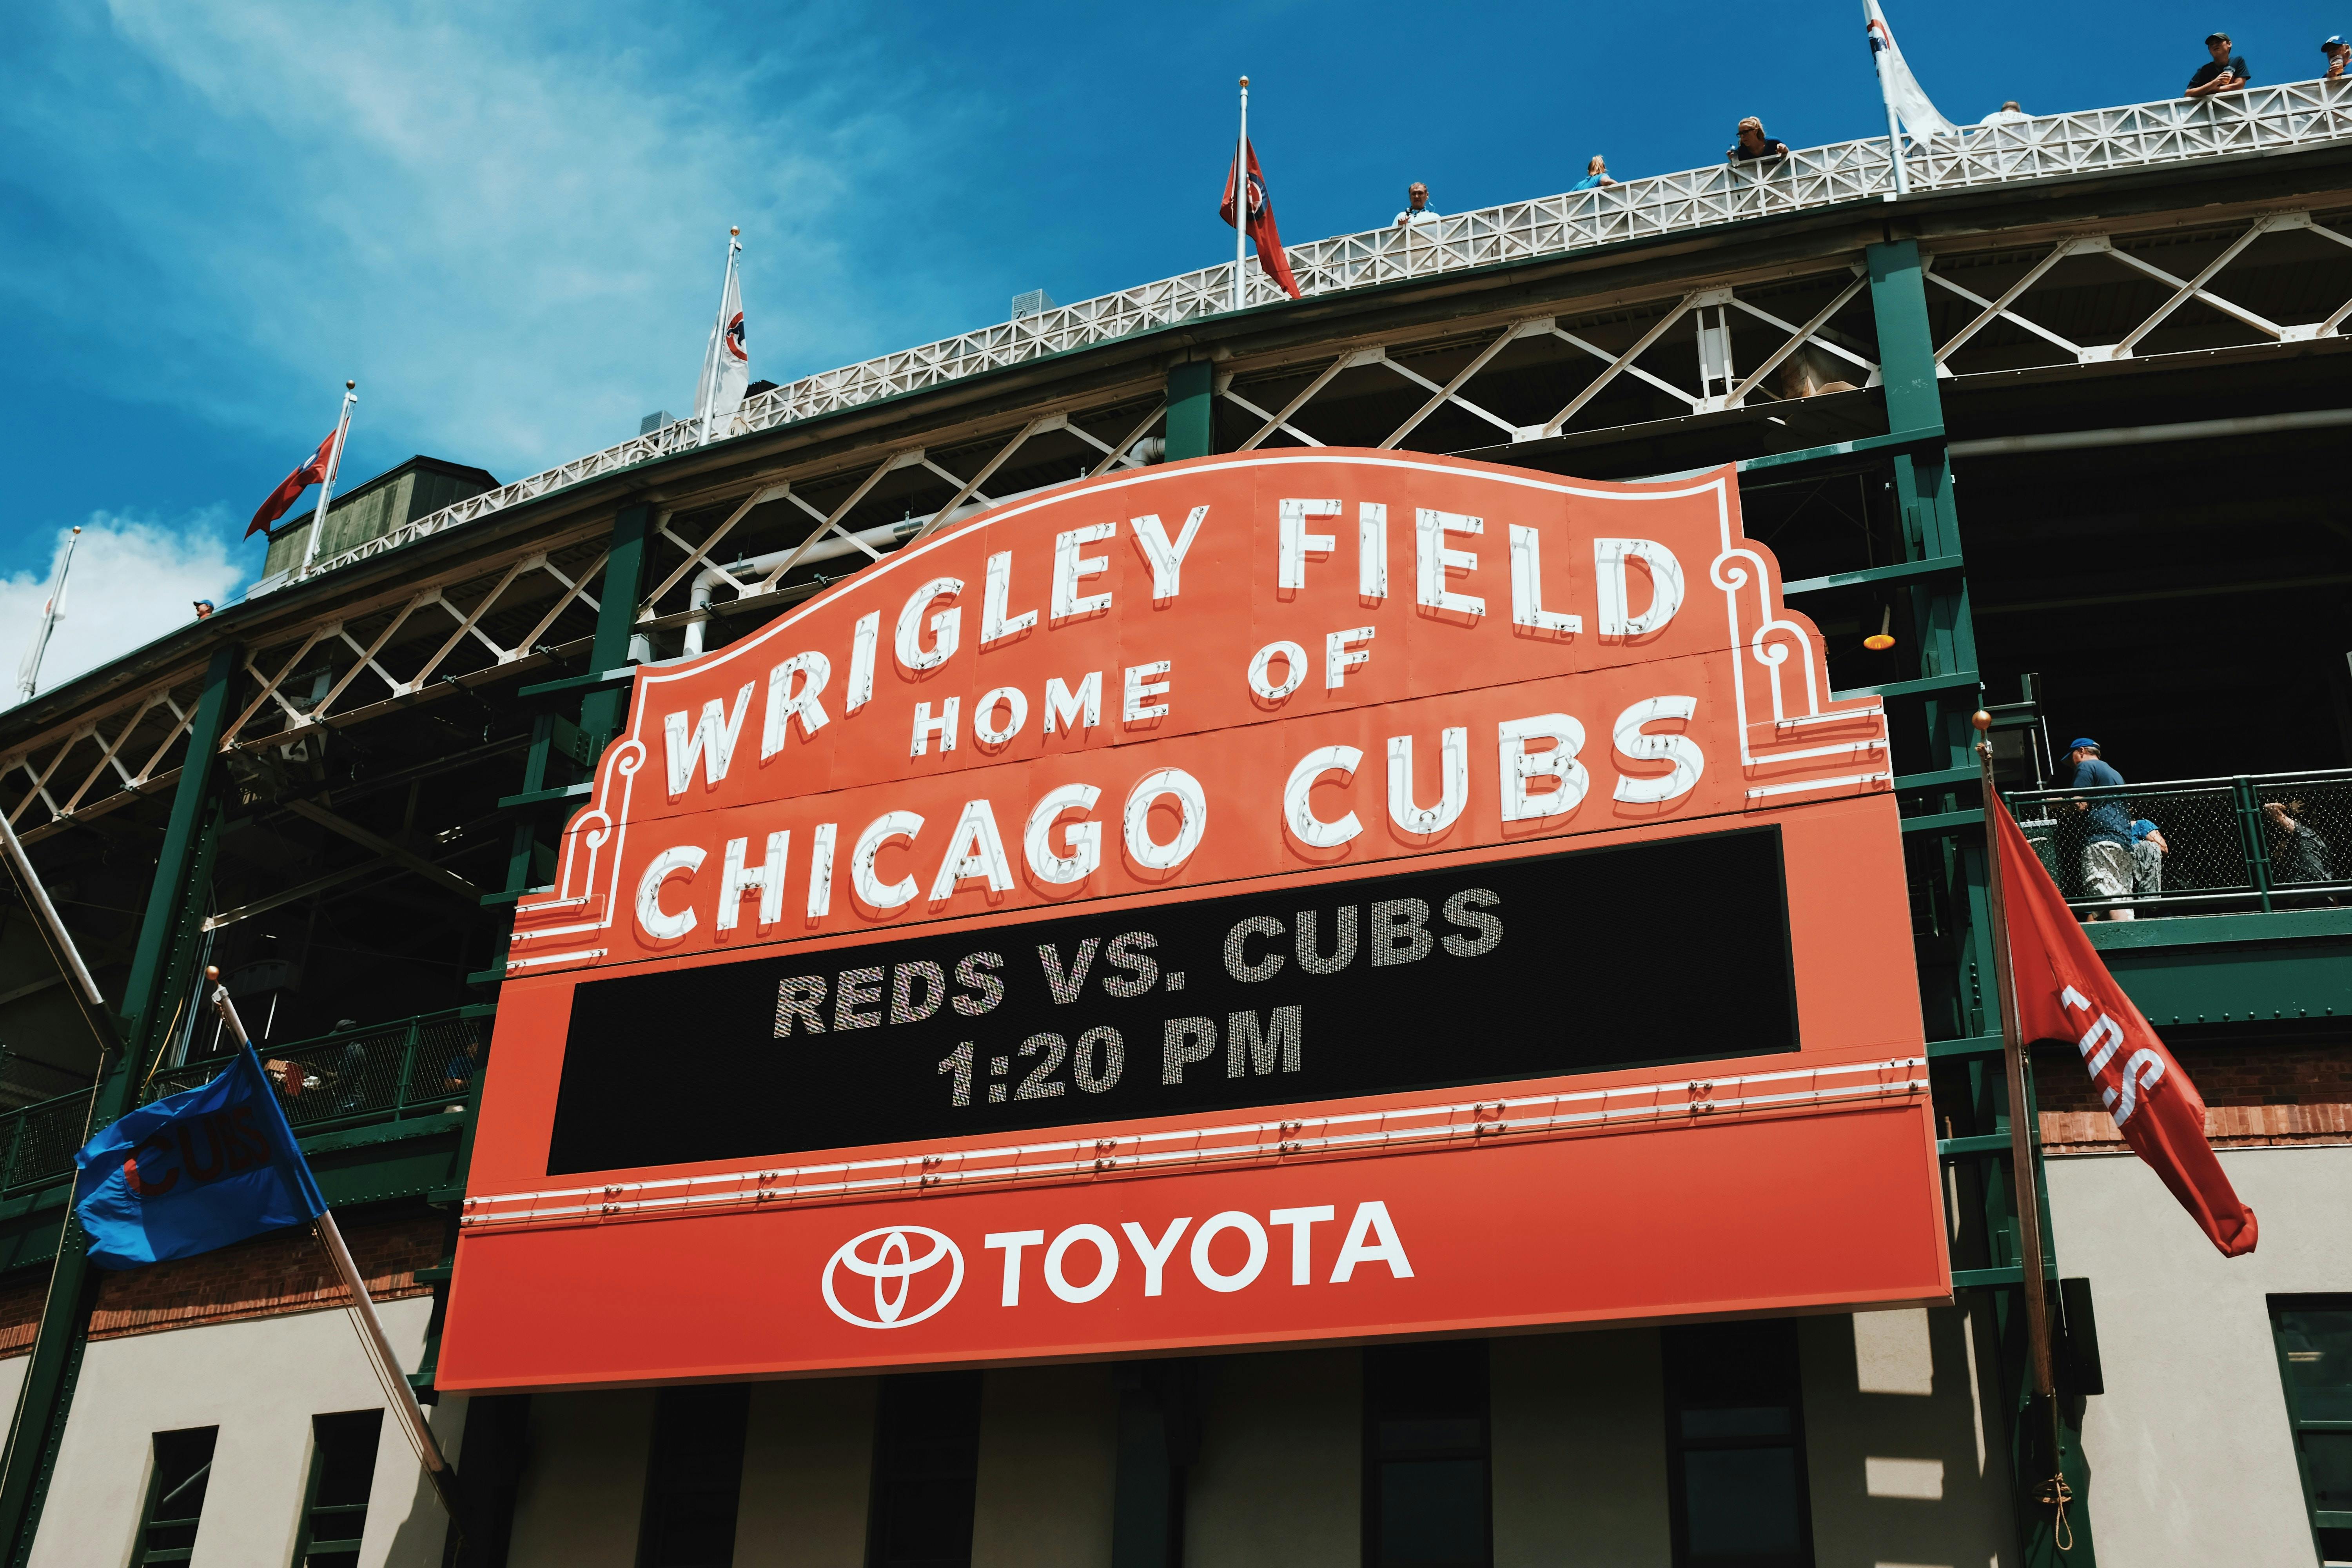 Wrigley Field visitor guide: everything you need to know - Bounce